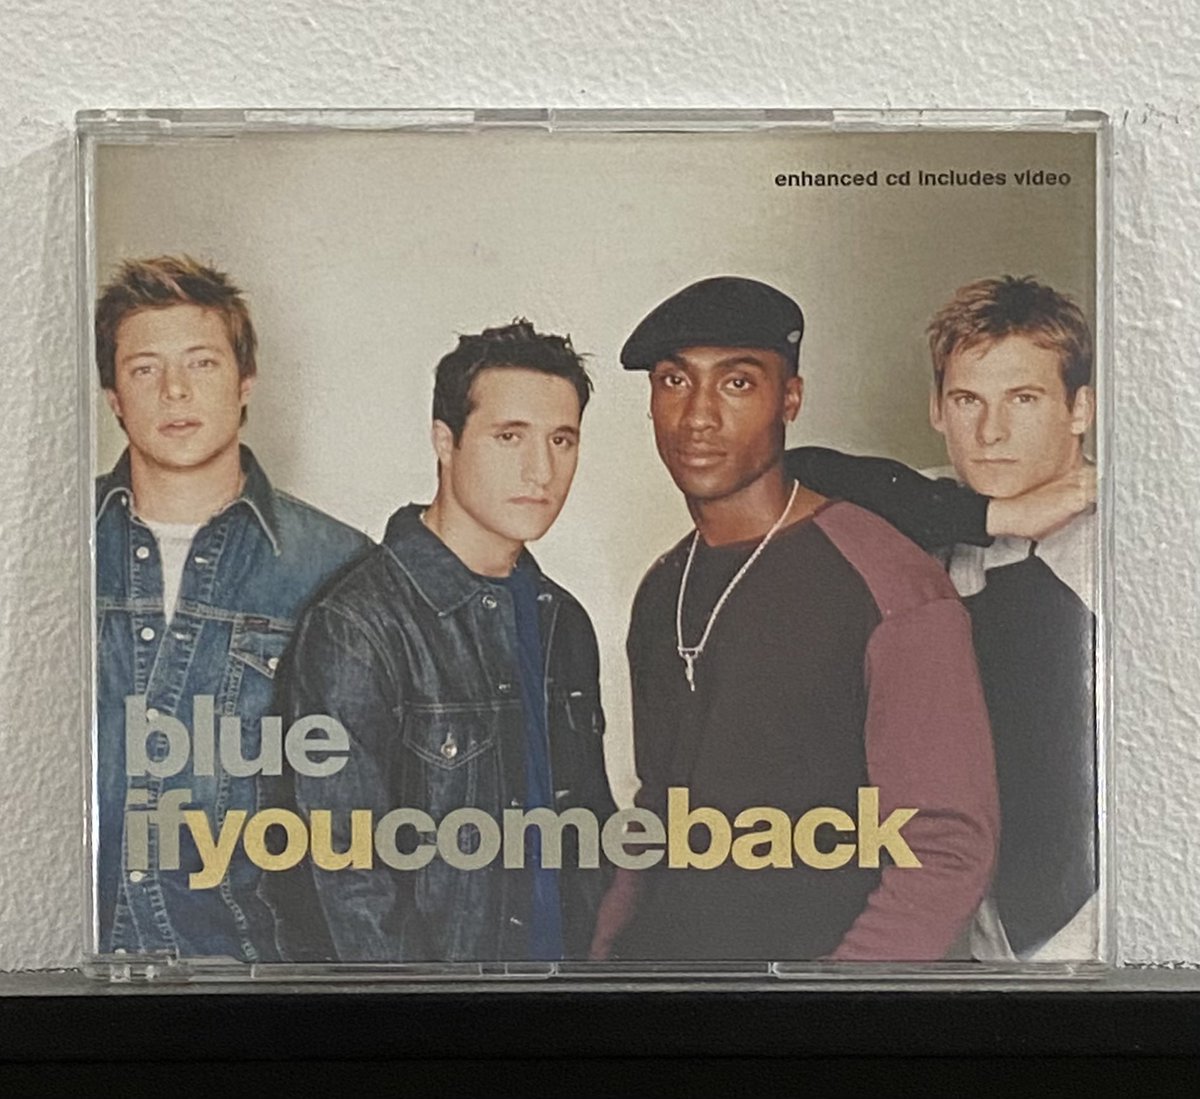 March 24, 2024

“If You Come Back” - Blue (CD Single) #latepost
#physicalmedia 
#cdcollection 
#cdcollector 
#discoftheday 
#AndreDiscOfTheDay 
Full story: facebook.com/share/NUAKkFwq…